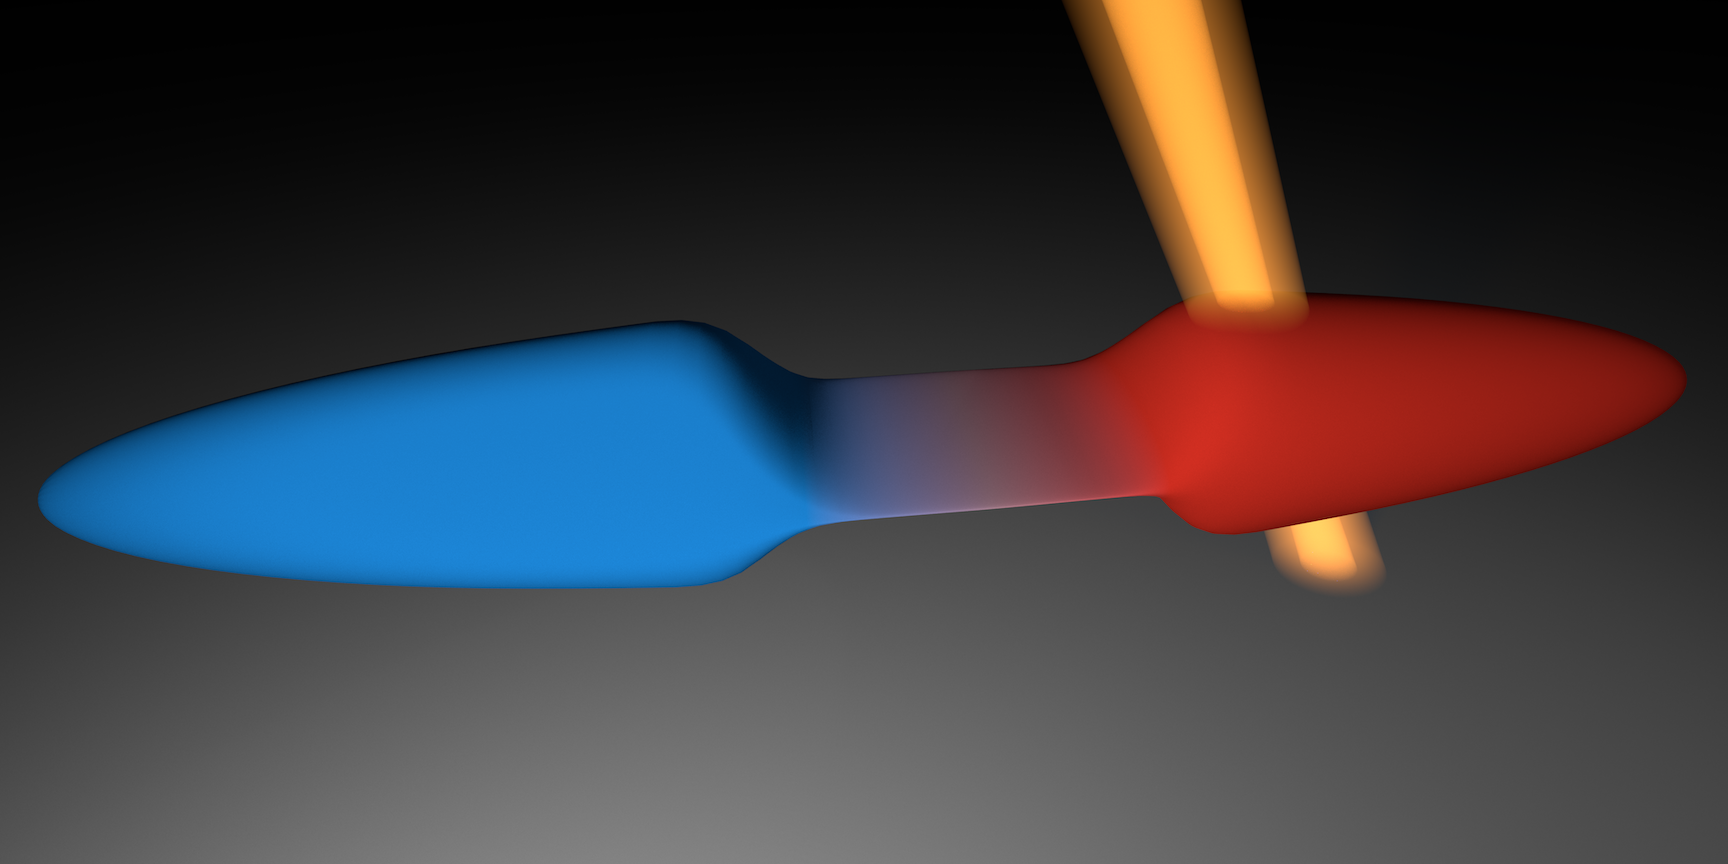 Artistic impression of the experiment in which Häusler and colleagues first heat one of two quantum-gas clouds and then connect them with a two-dimensional channel, such that they can equilibrate.